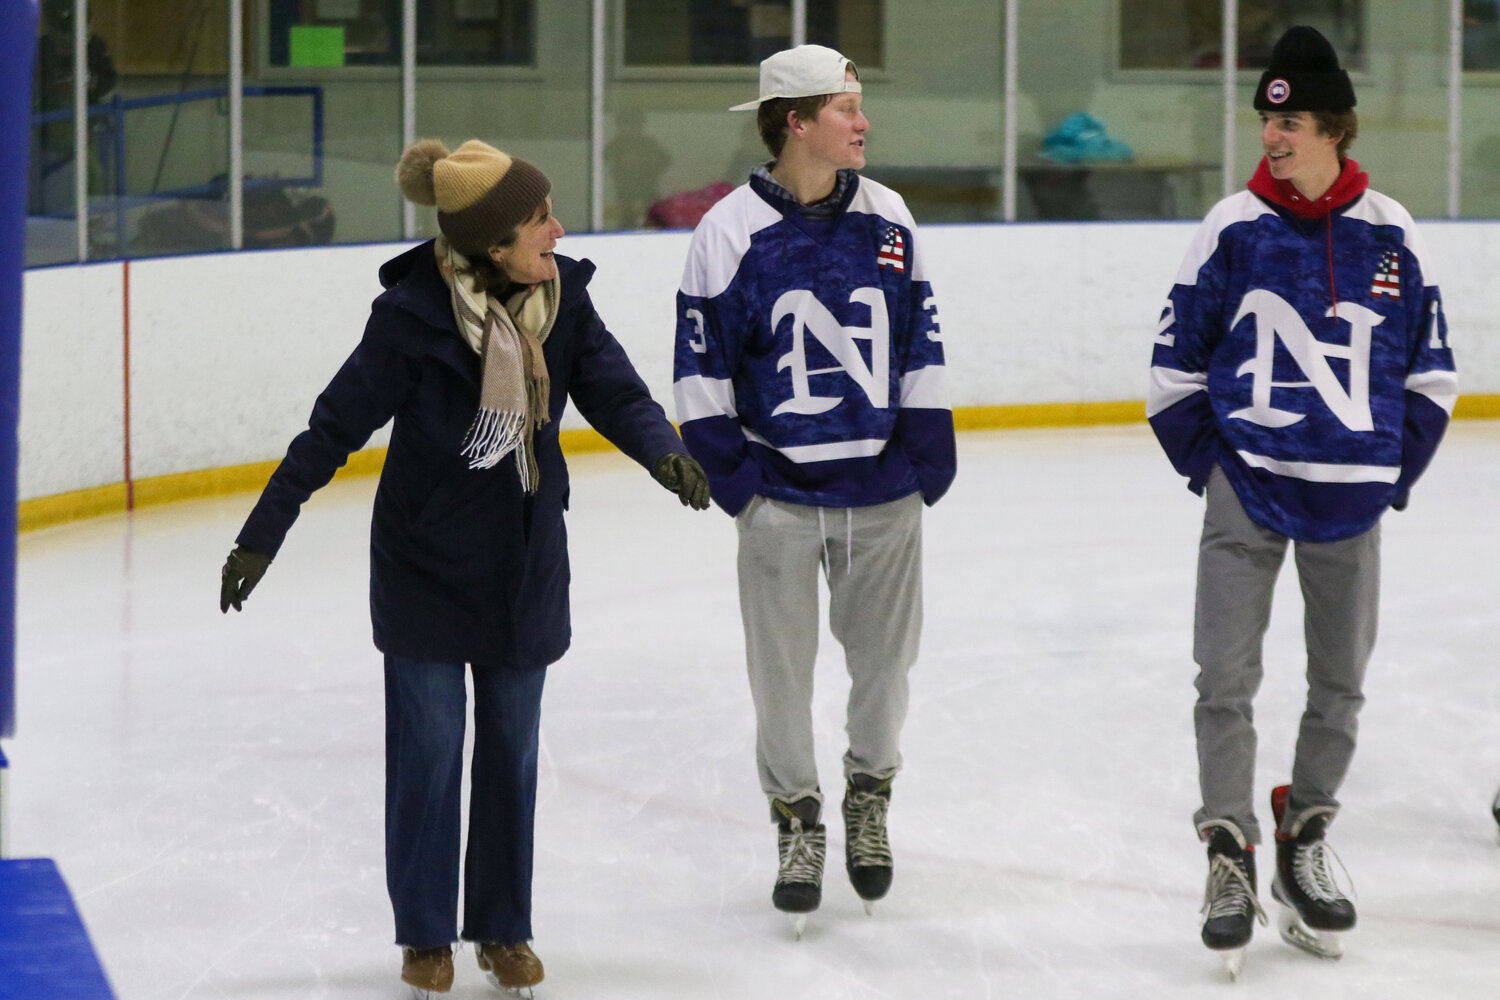 The varsity boys hockey team hosted an open skate Wednesday night at Nantucket Ice, where the Whalers were joined by family, alumni and youth hockey players.